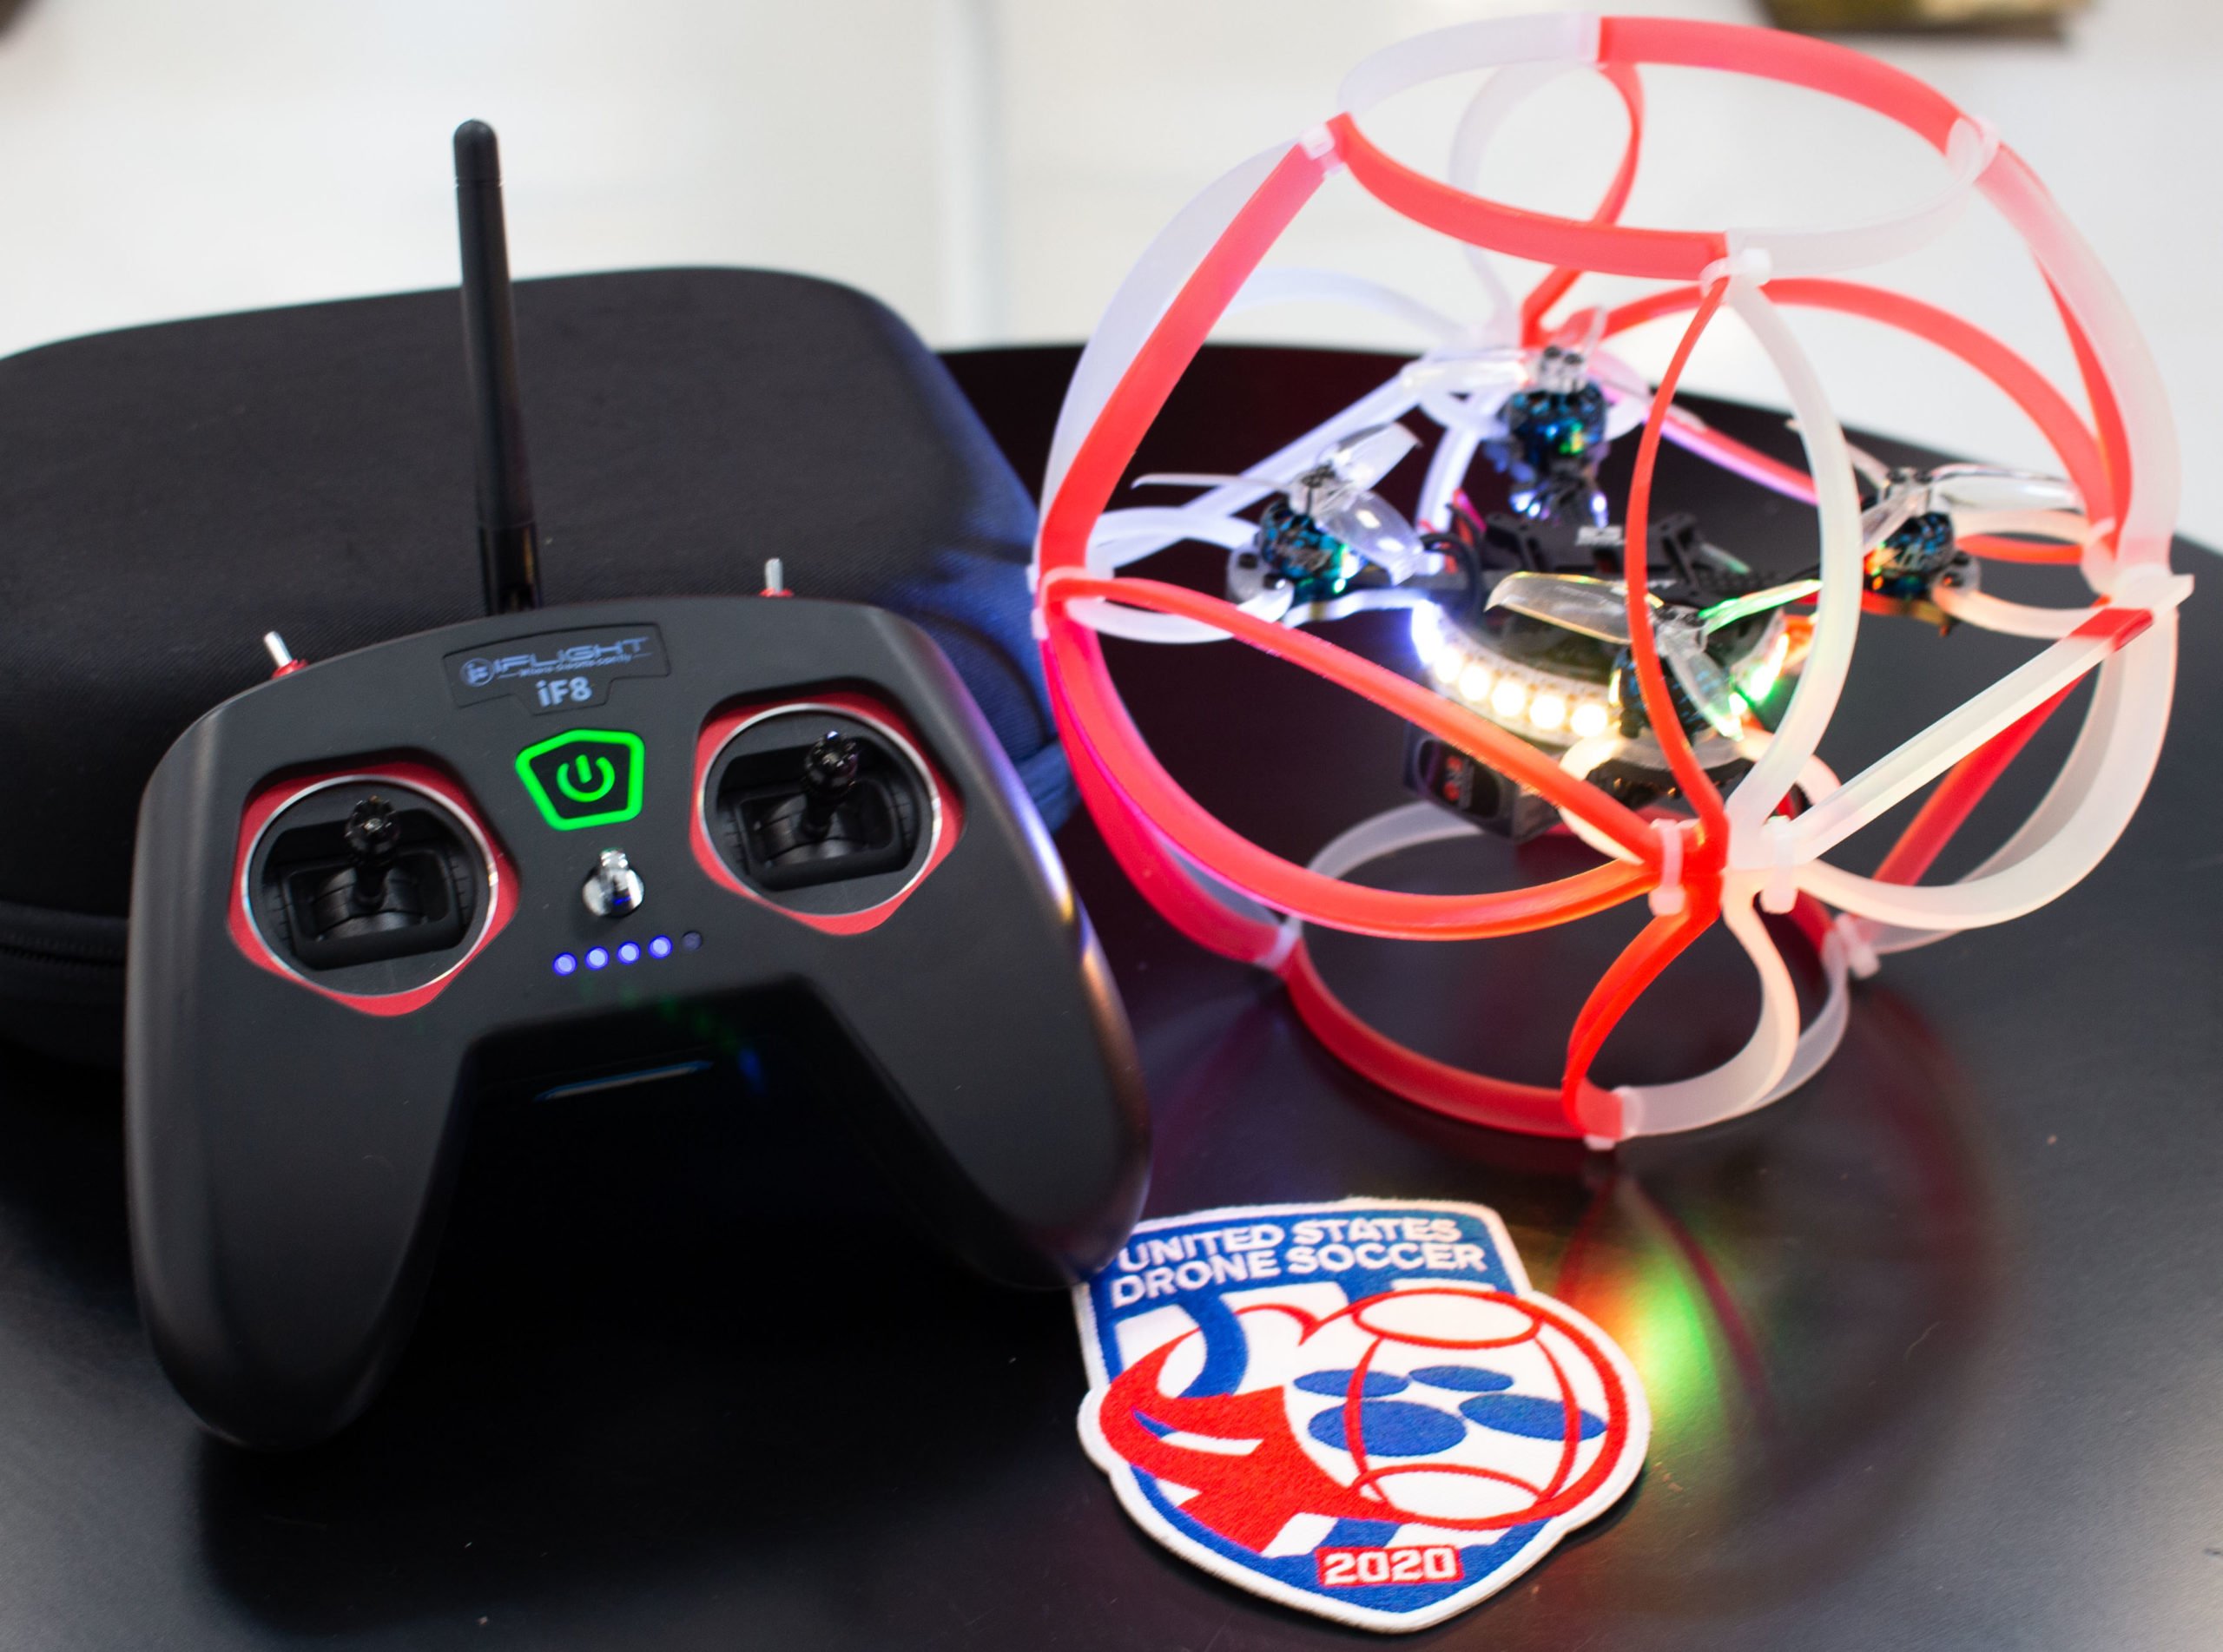 High schoolers from Colorado headed to South Korea for drone soccer